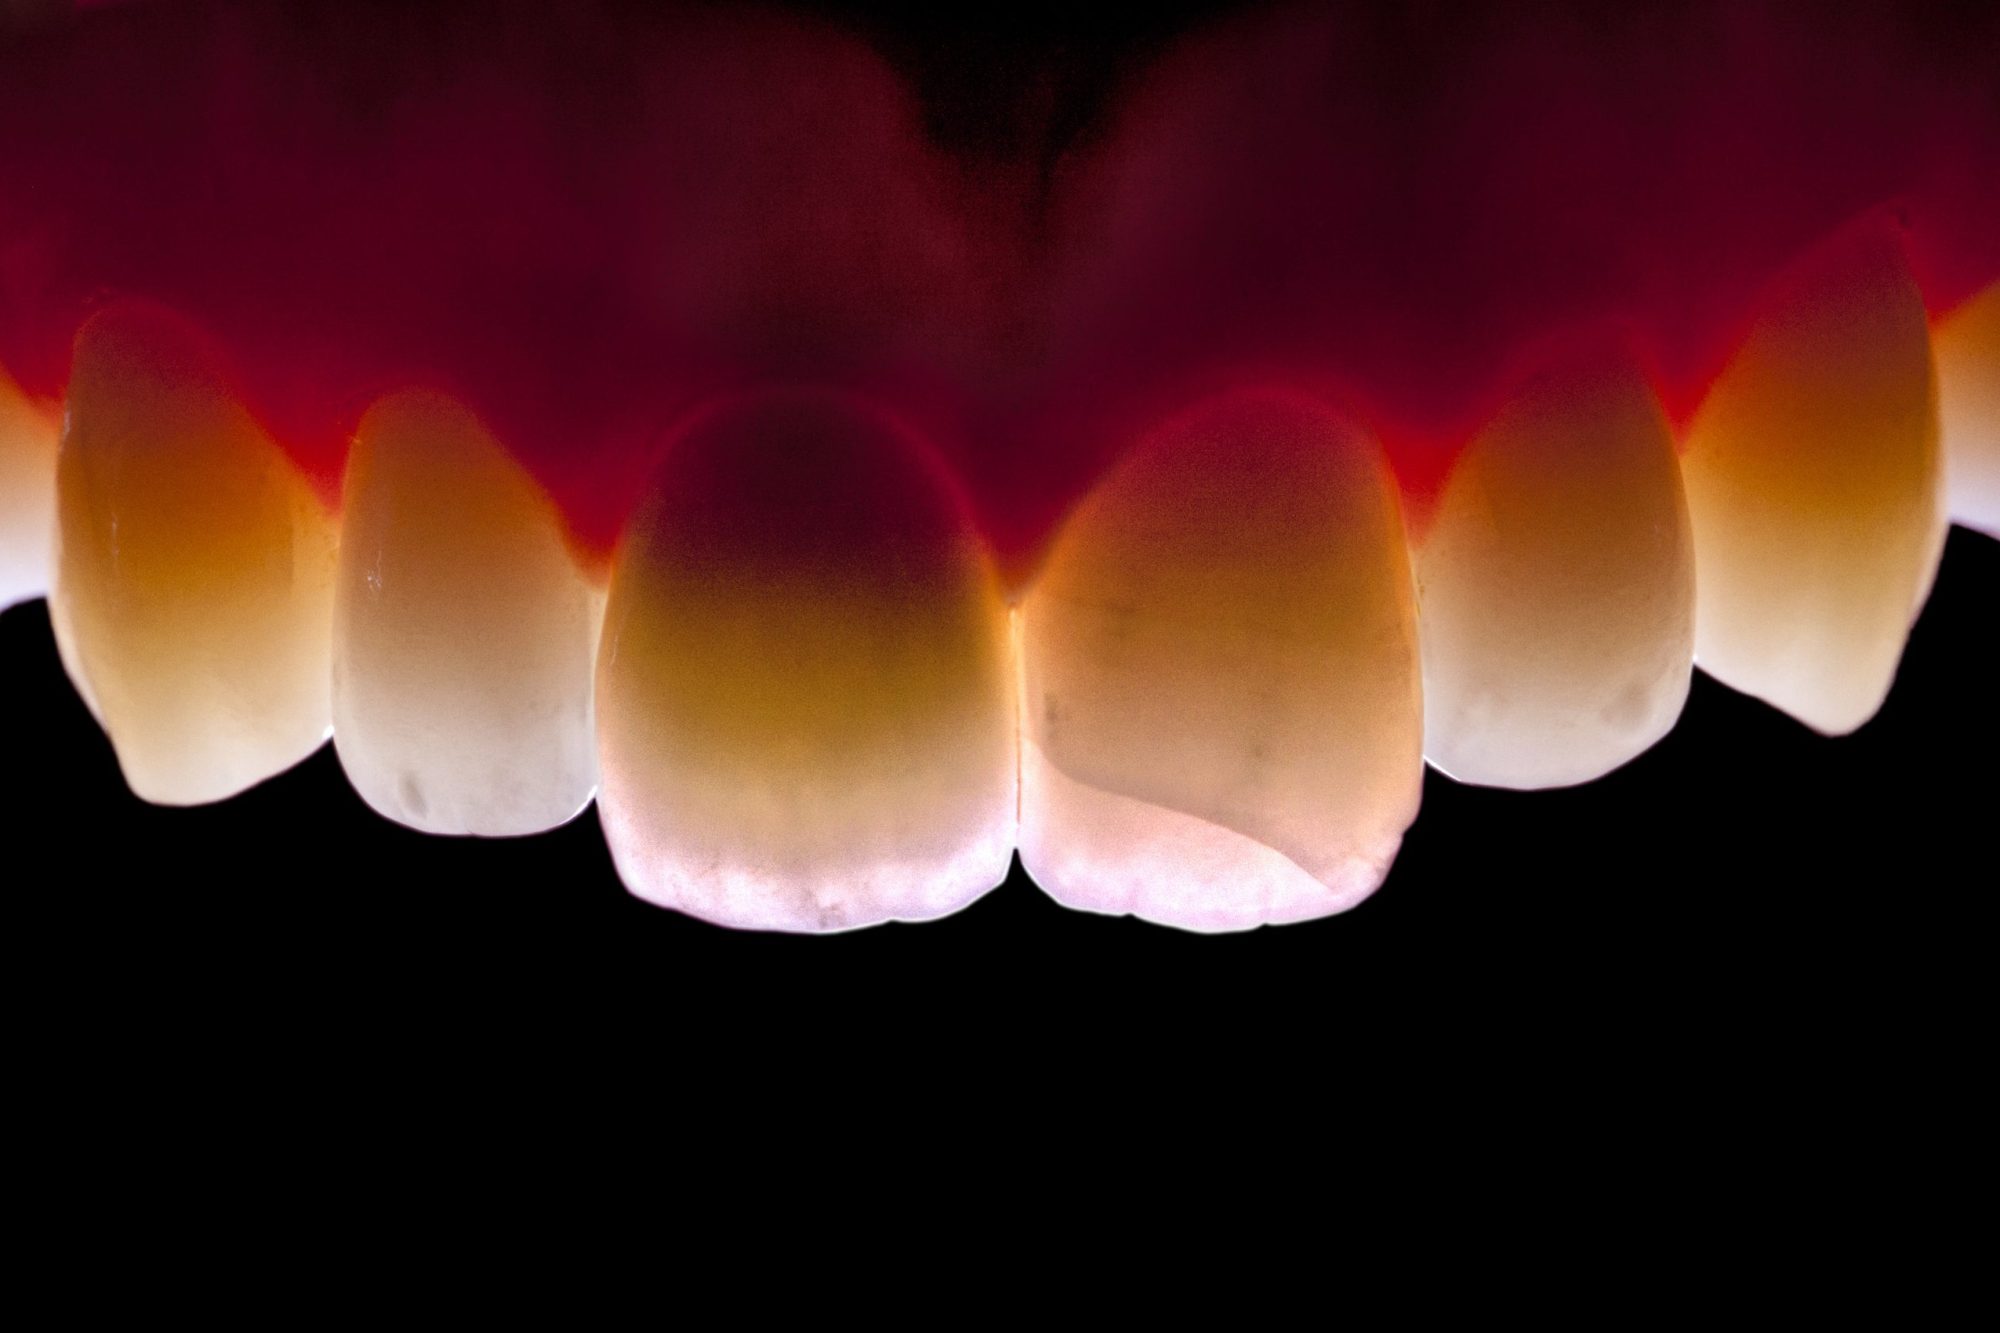 Figure 22: Excellent light transmittance capacity of the ceramic crown, indistinguishable from the neighbouring dentition